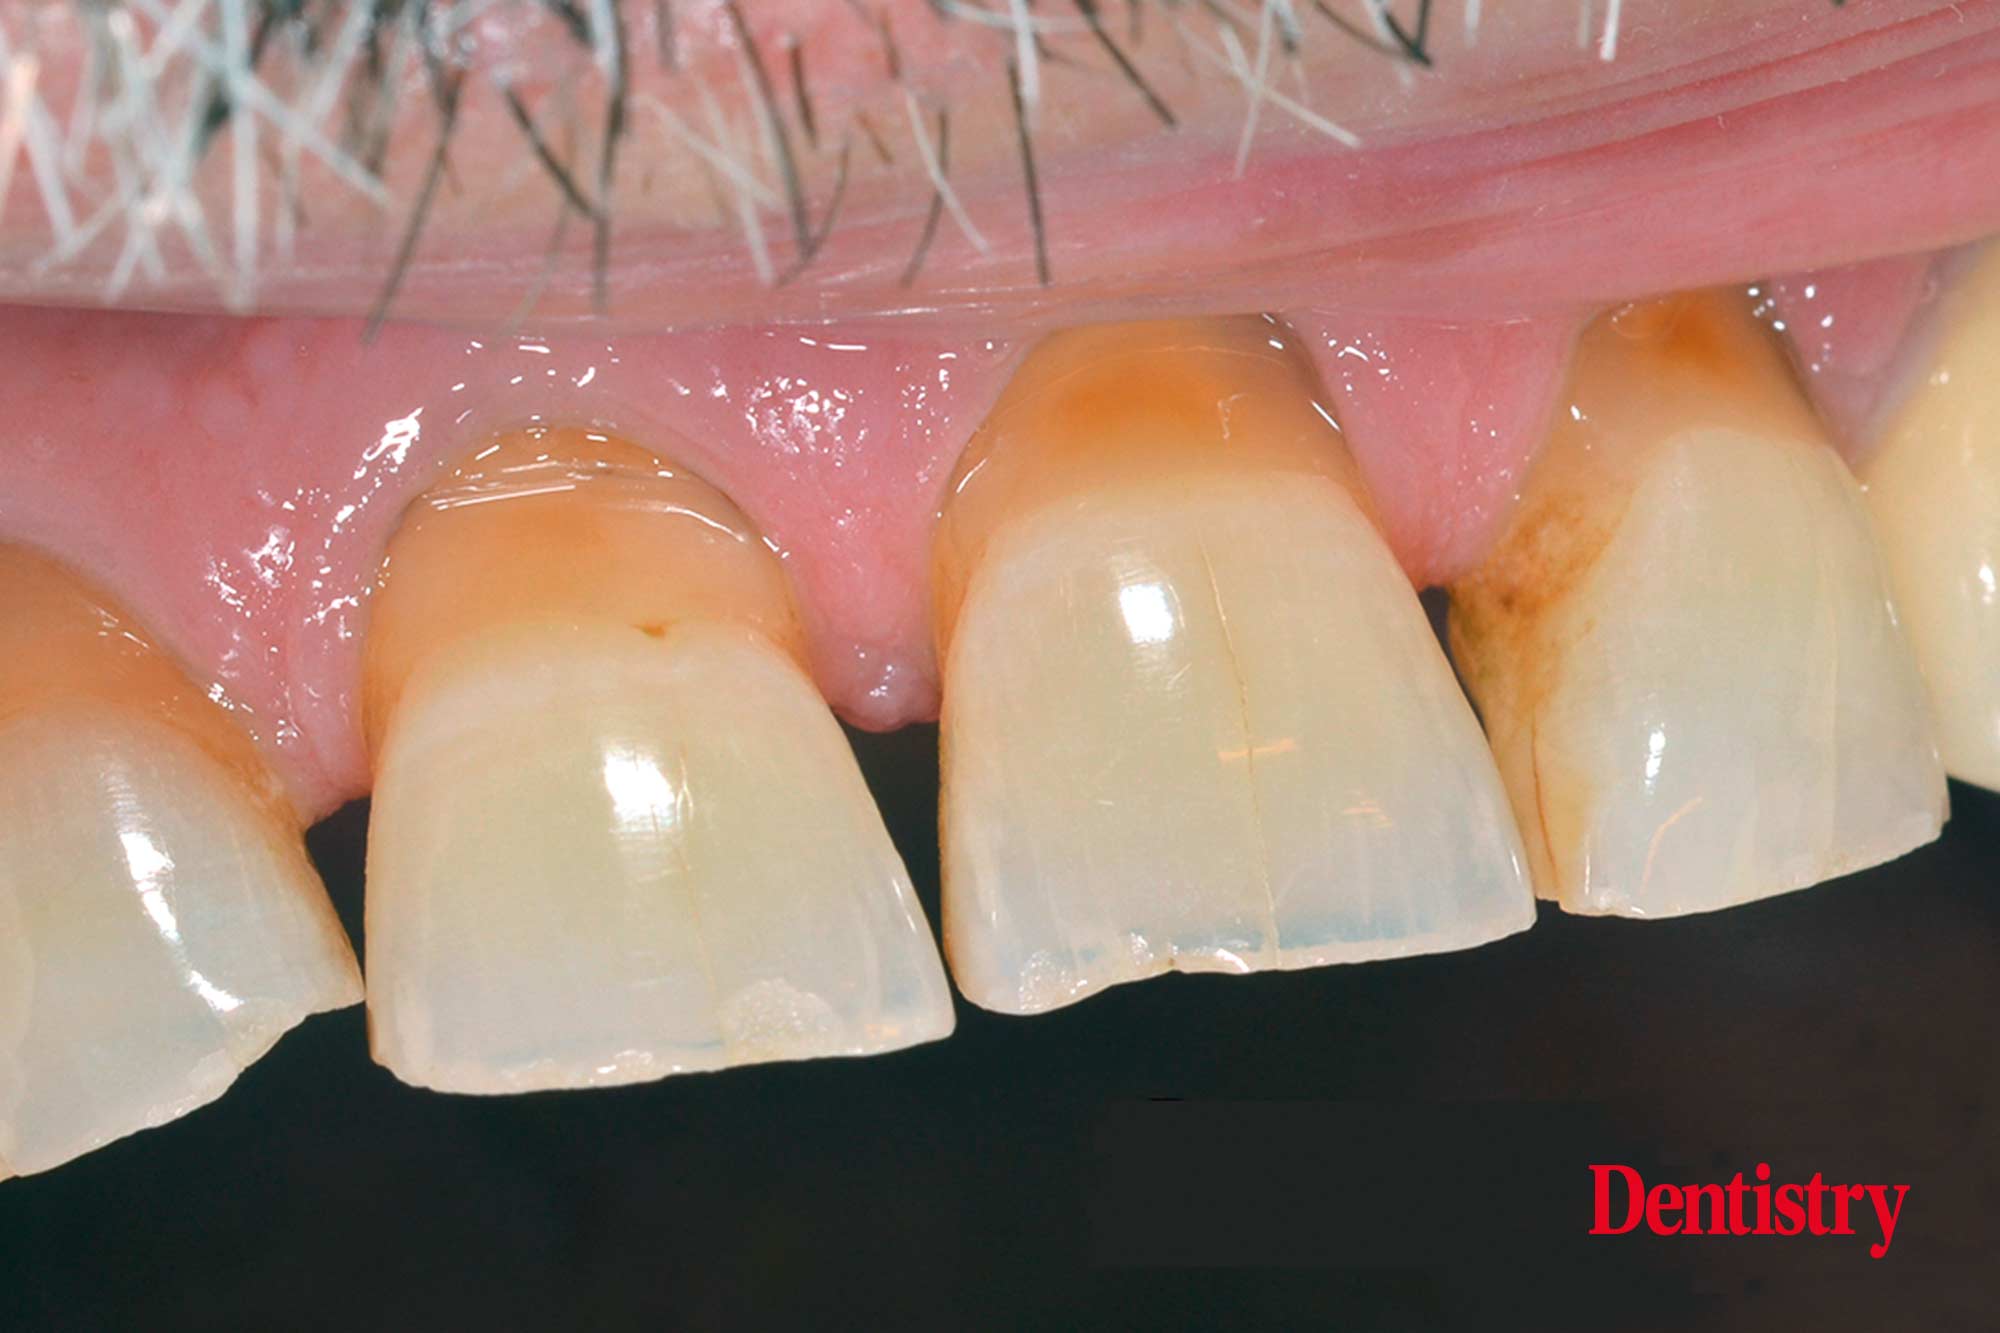 Fabrication and cementation of crowns without chipping